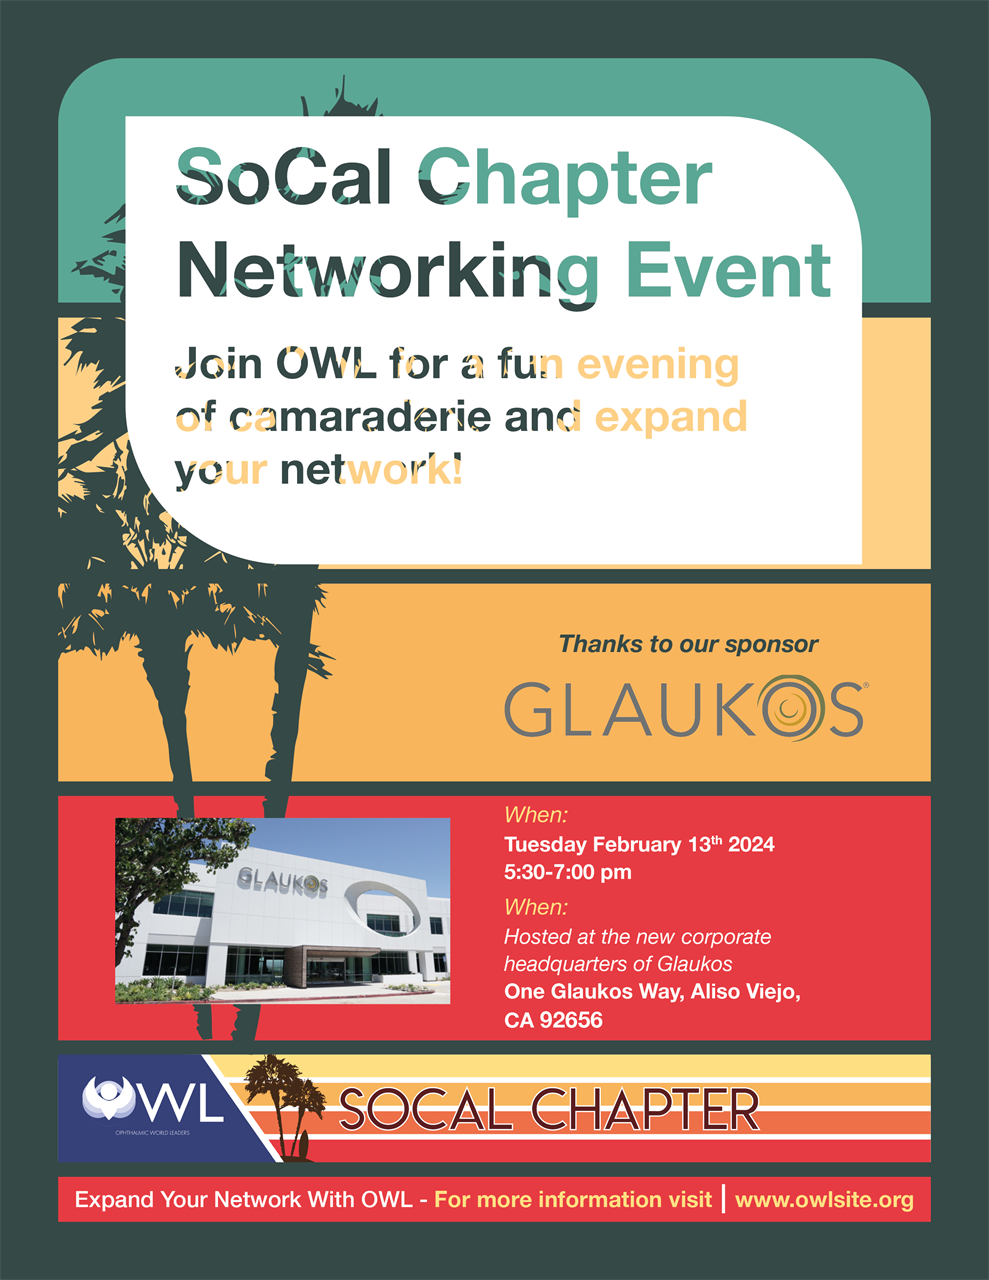 Join OWL for a fun evening of camaraderie and expand your network on February 13, 2024; 5:30 PM. Location: Glaukos HQ; One Glaukos Way, Aliso Viejo, CA 92656 | Thank you to our sponsor, Glaukos. Our Connect events offer professionals like you a great opportunity to network and meet new colleagues. Register today!